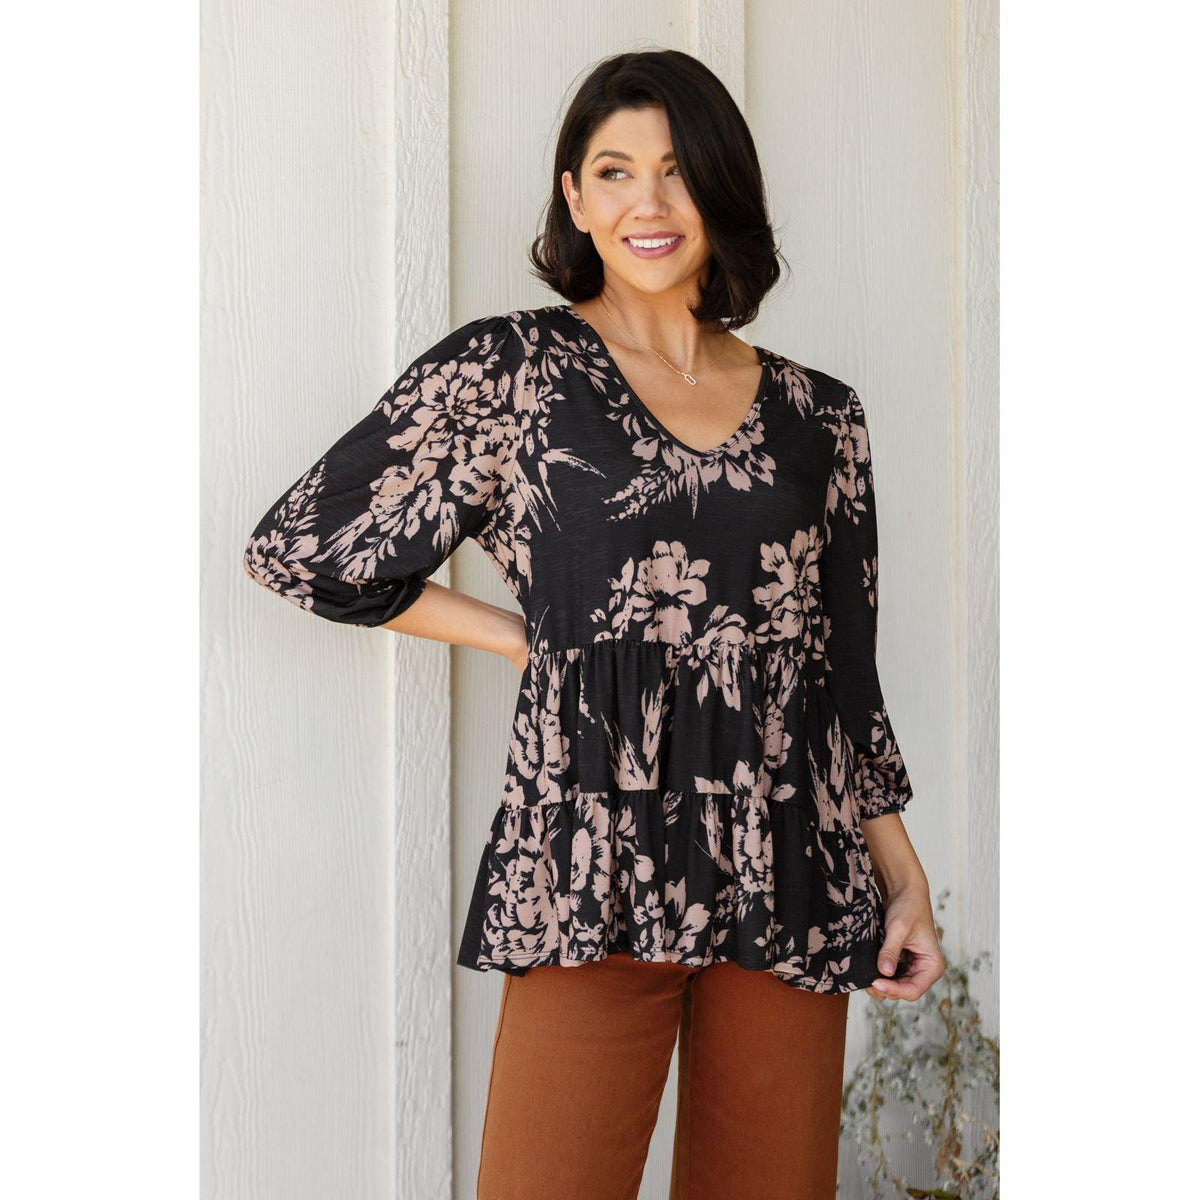 Women's Your Choice V-Neck Floral Top in Black - becauseofadi